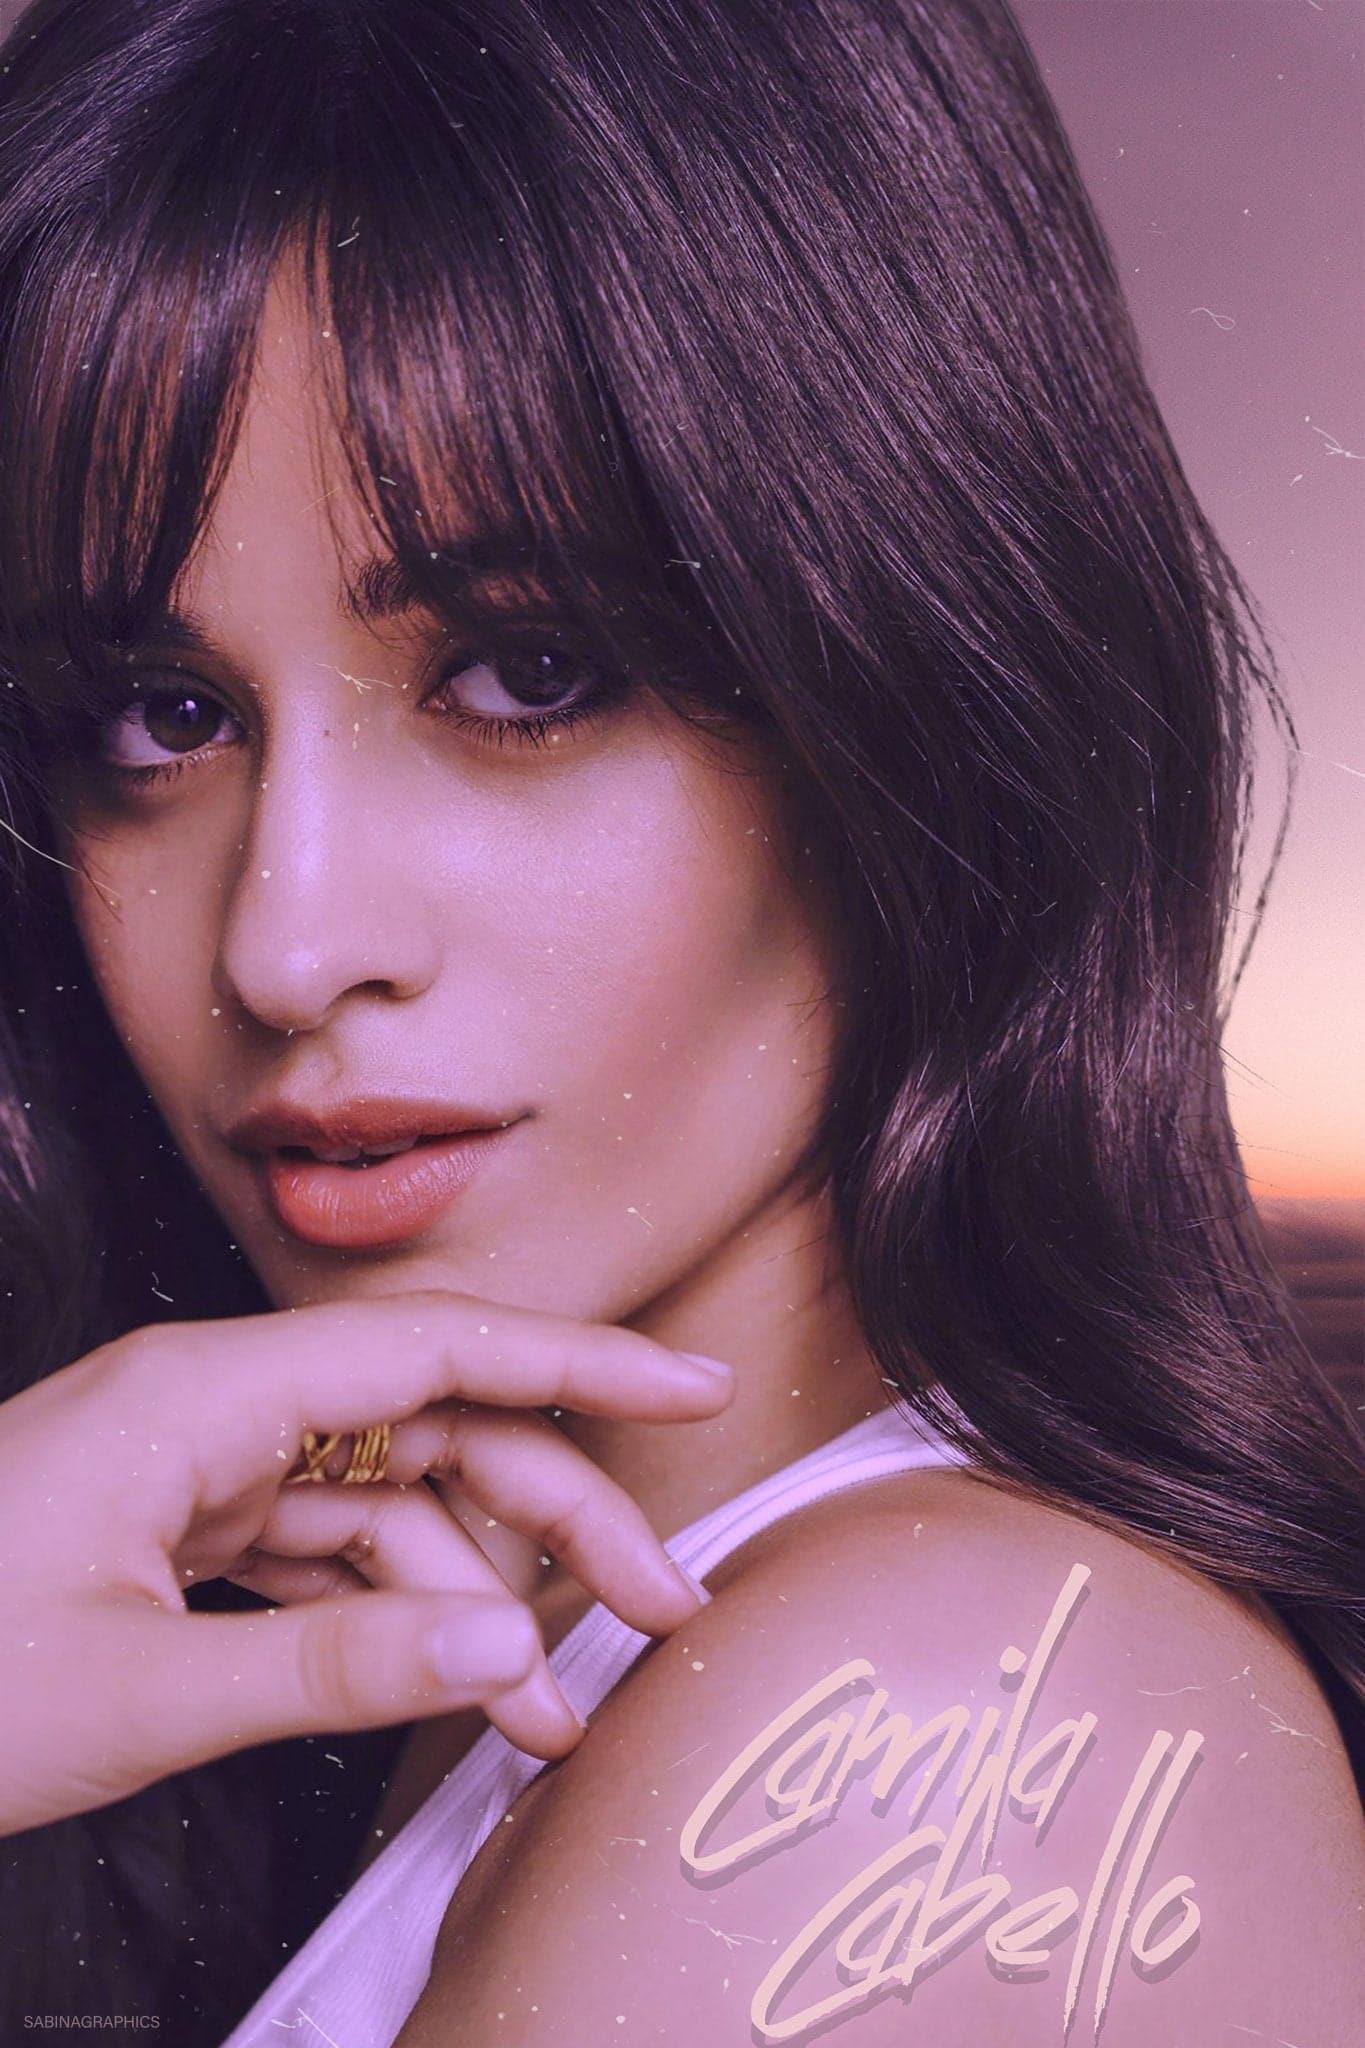 Camila Cabello ‘Bliss’ Poster - Posters Plug